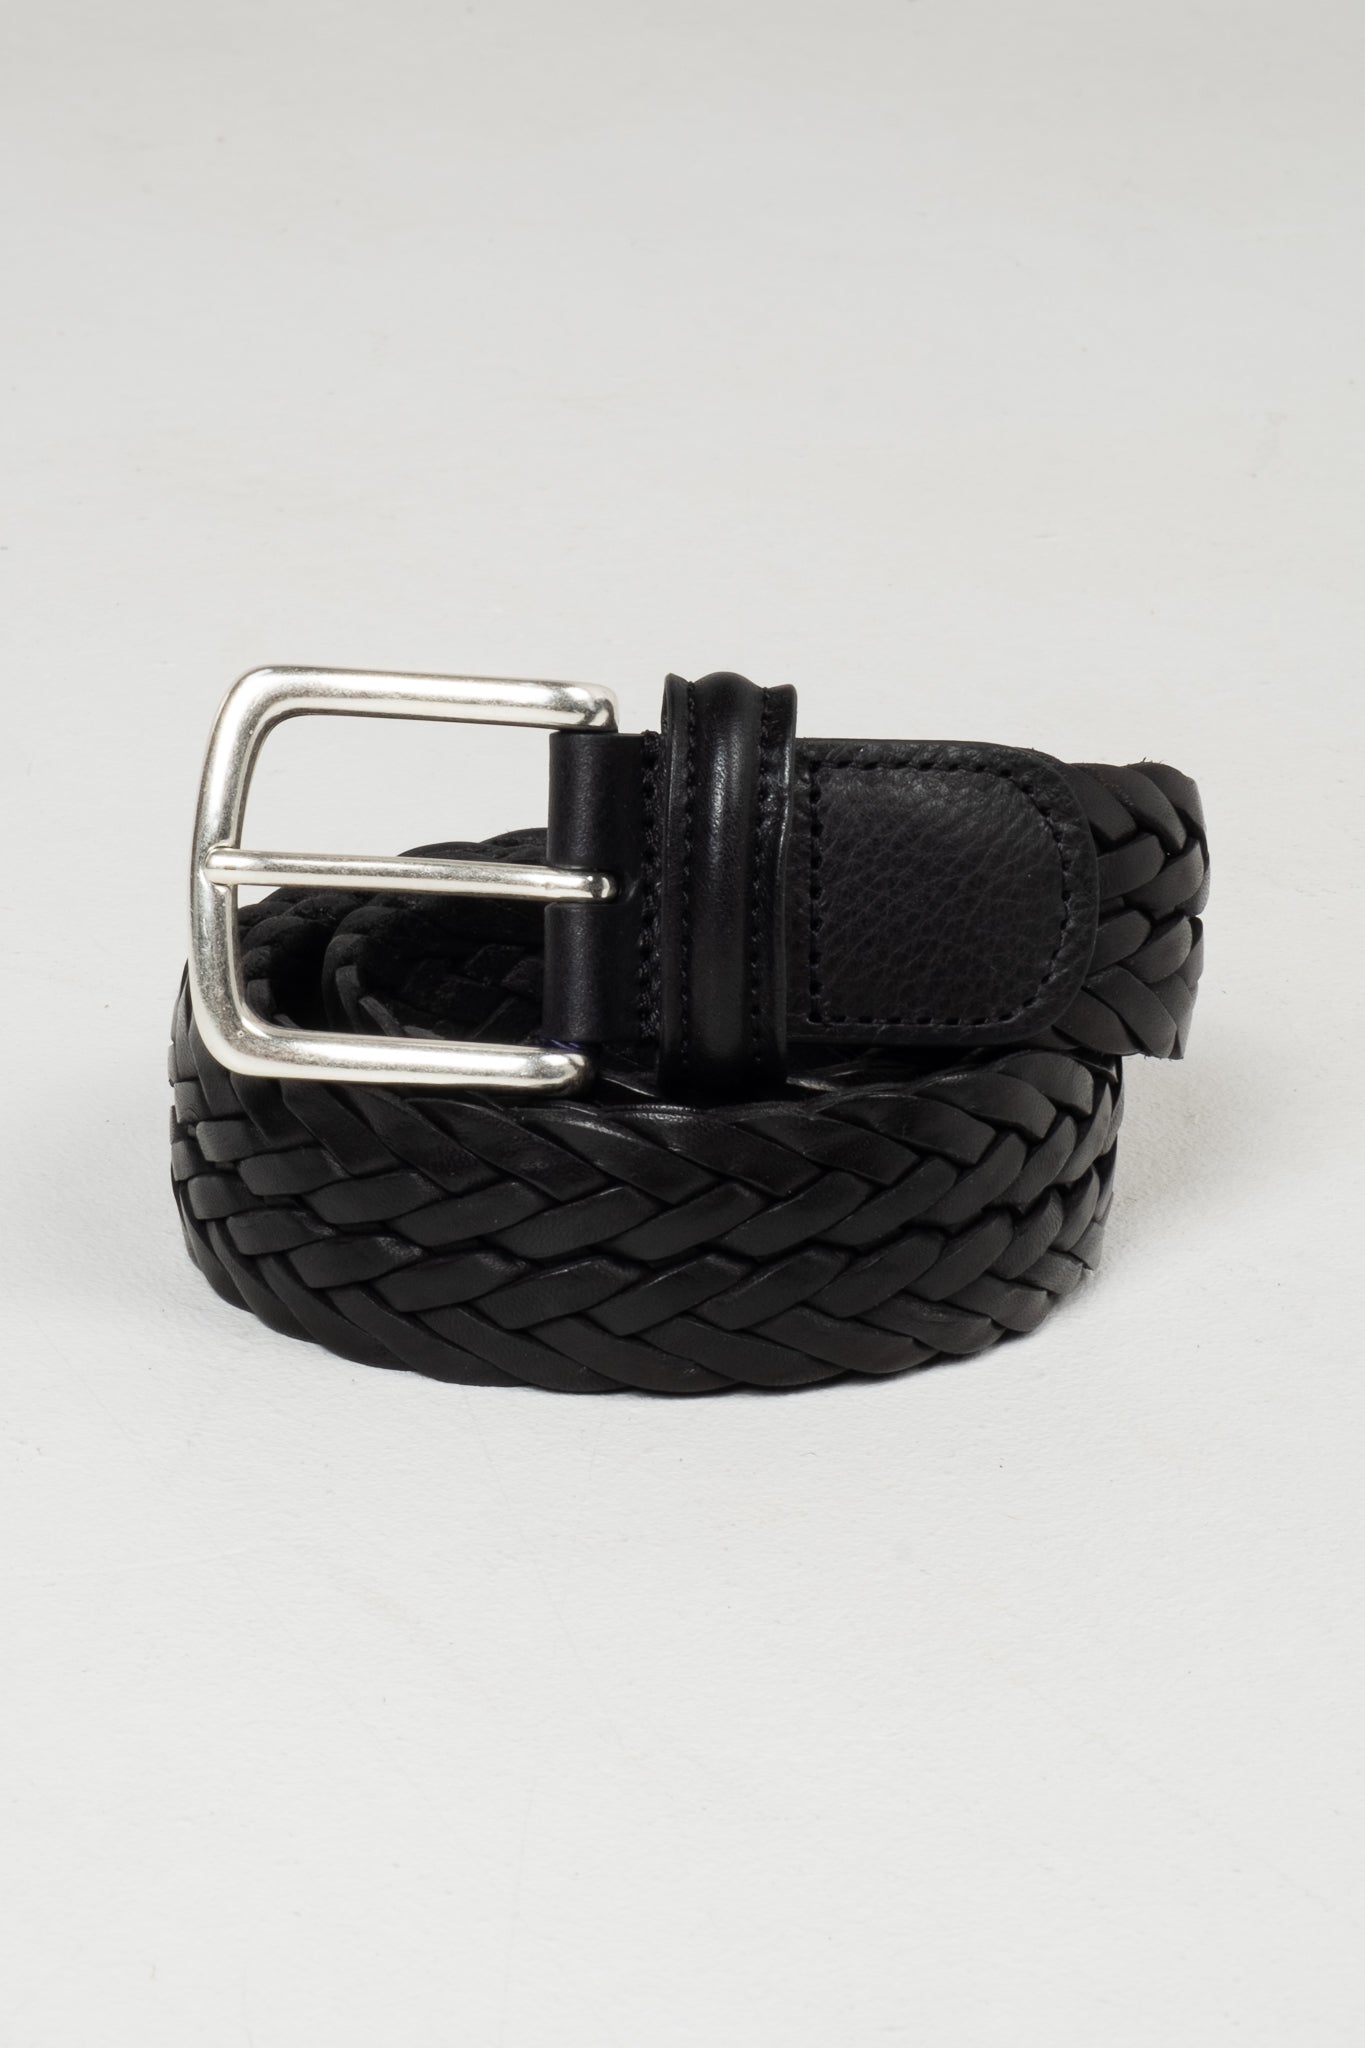 Anderson's Braided Leather Belt - Black – Circle of Friends Shop